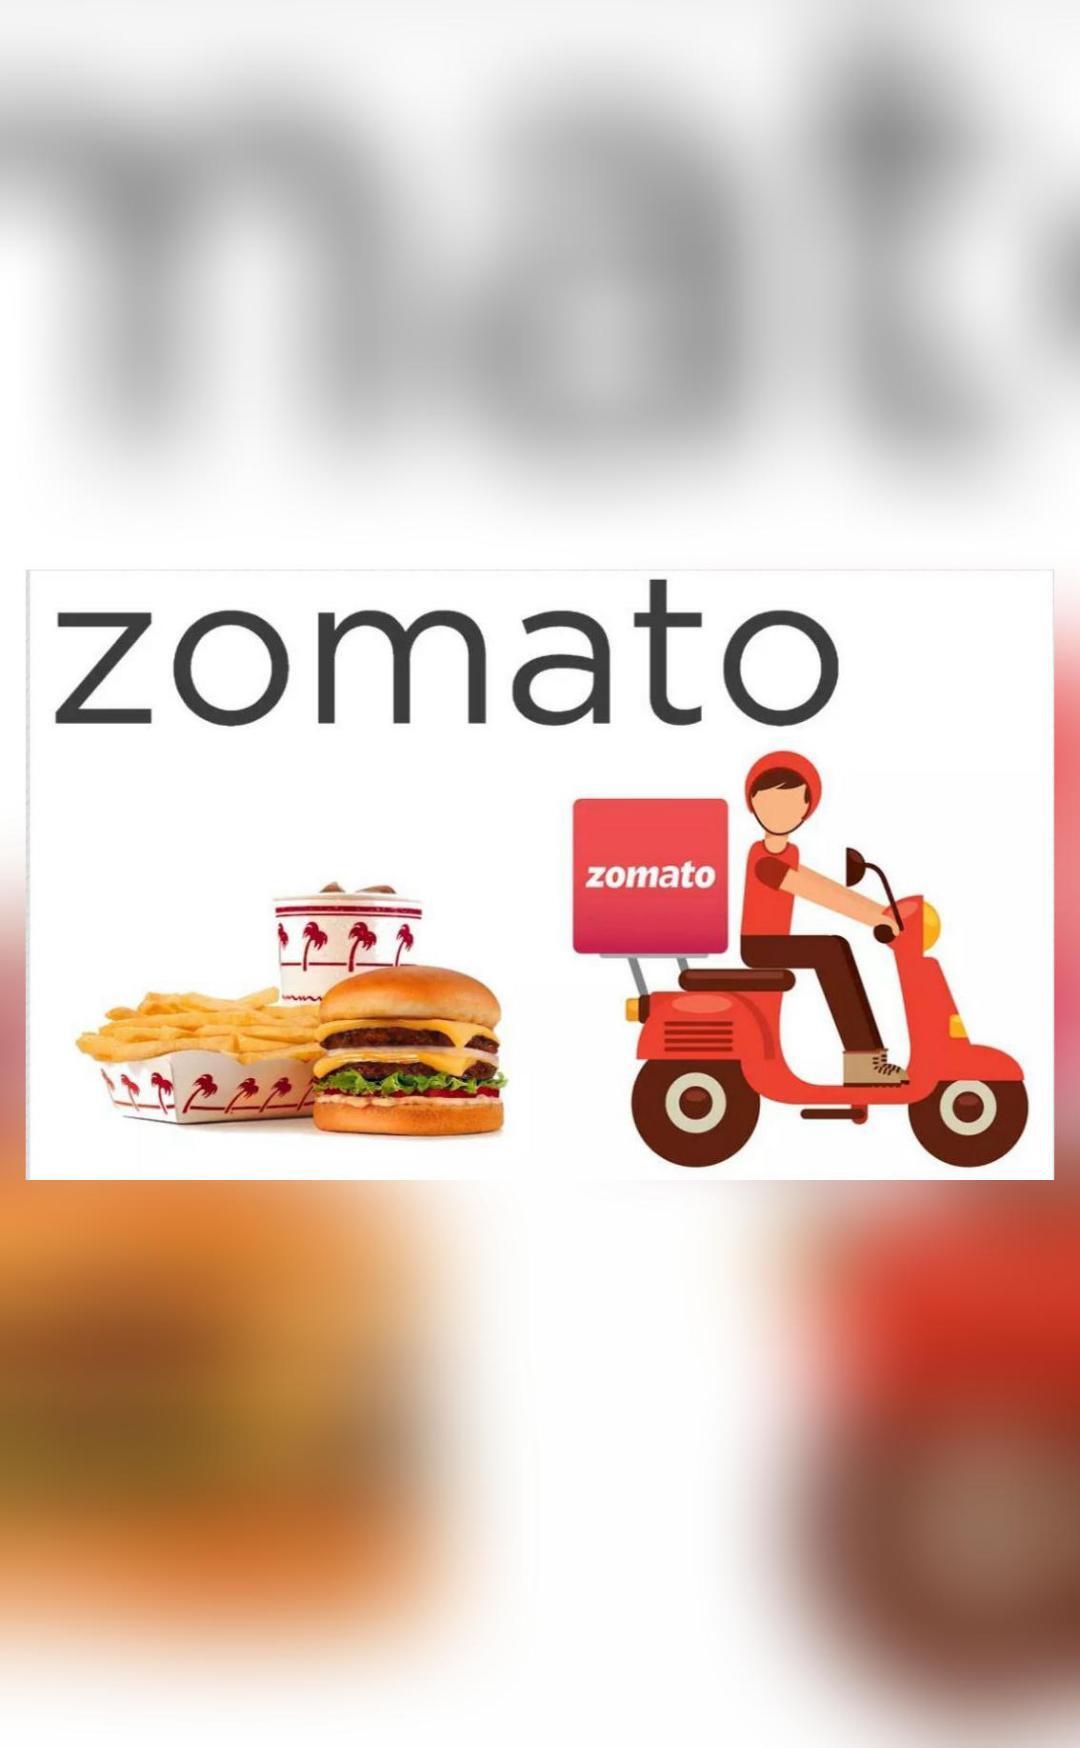 Zomato shares hit 52-week high of ₹121.90